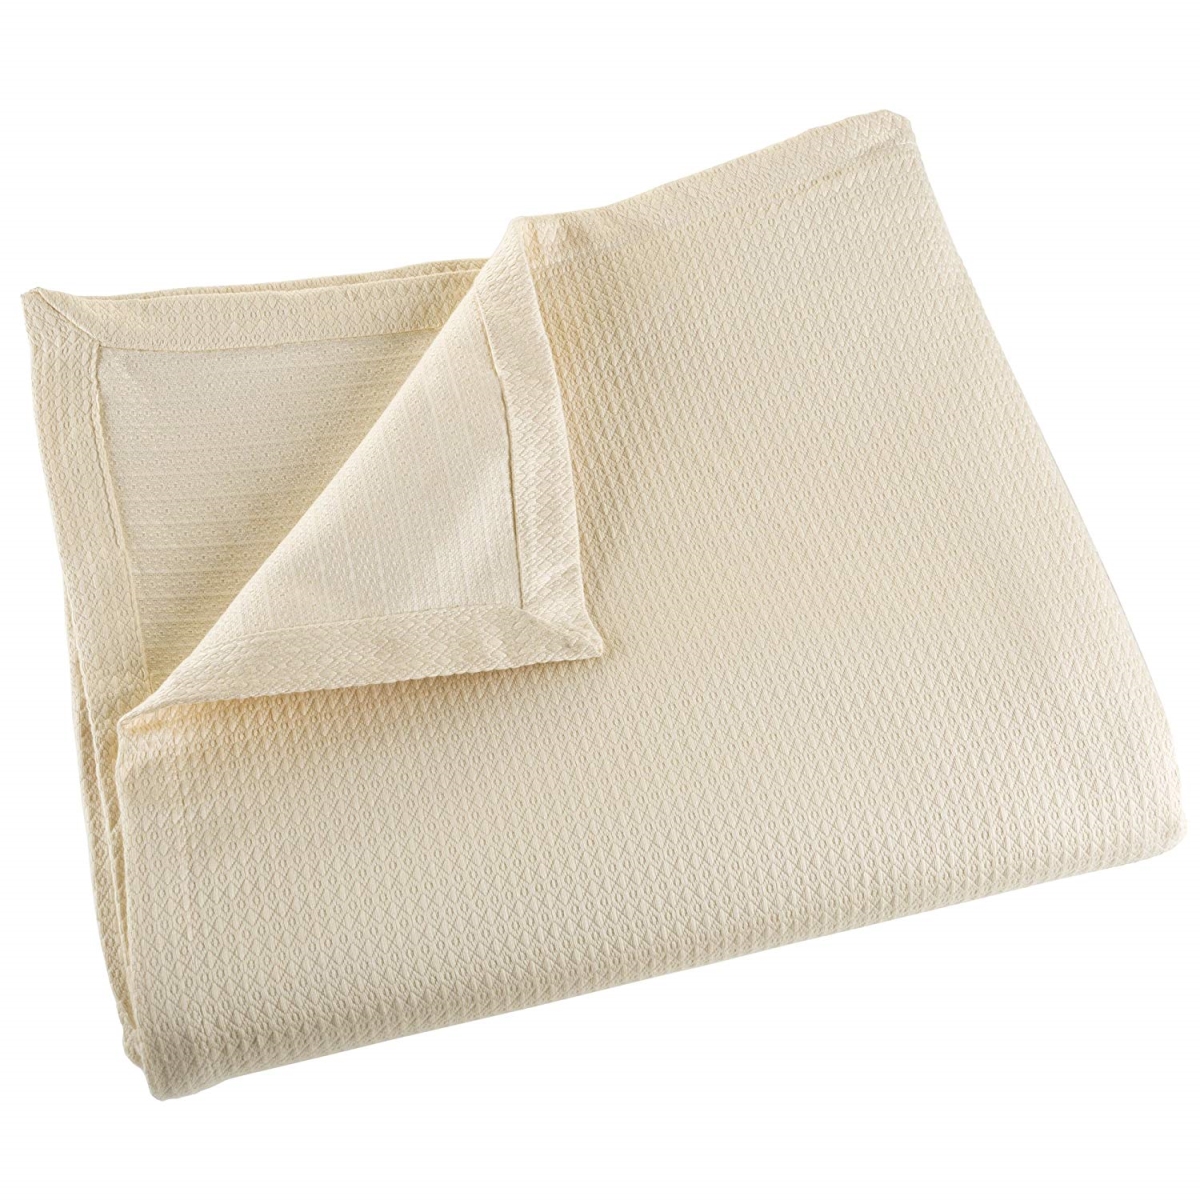 61a-43319 Soft Breathable 100 Percent Cotton Blanket, Cream - King Size